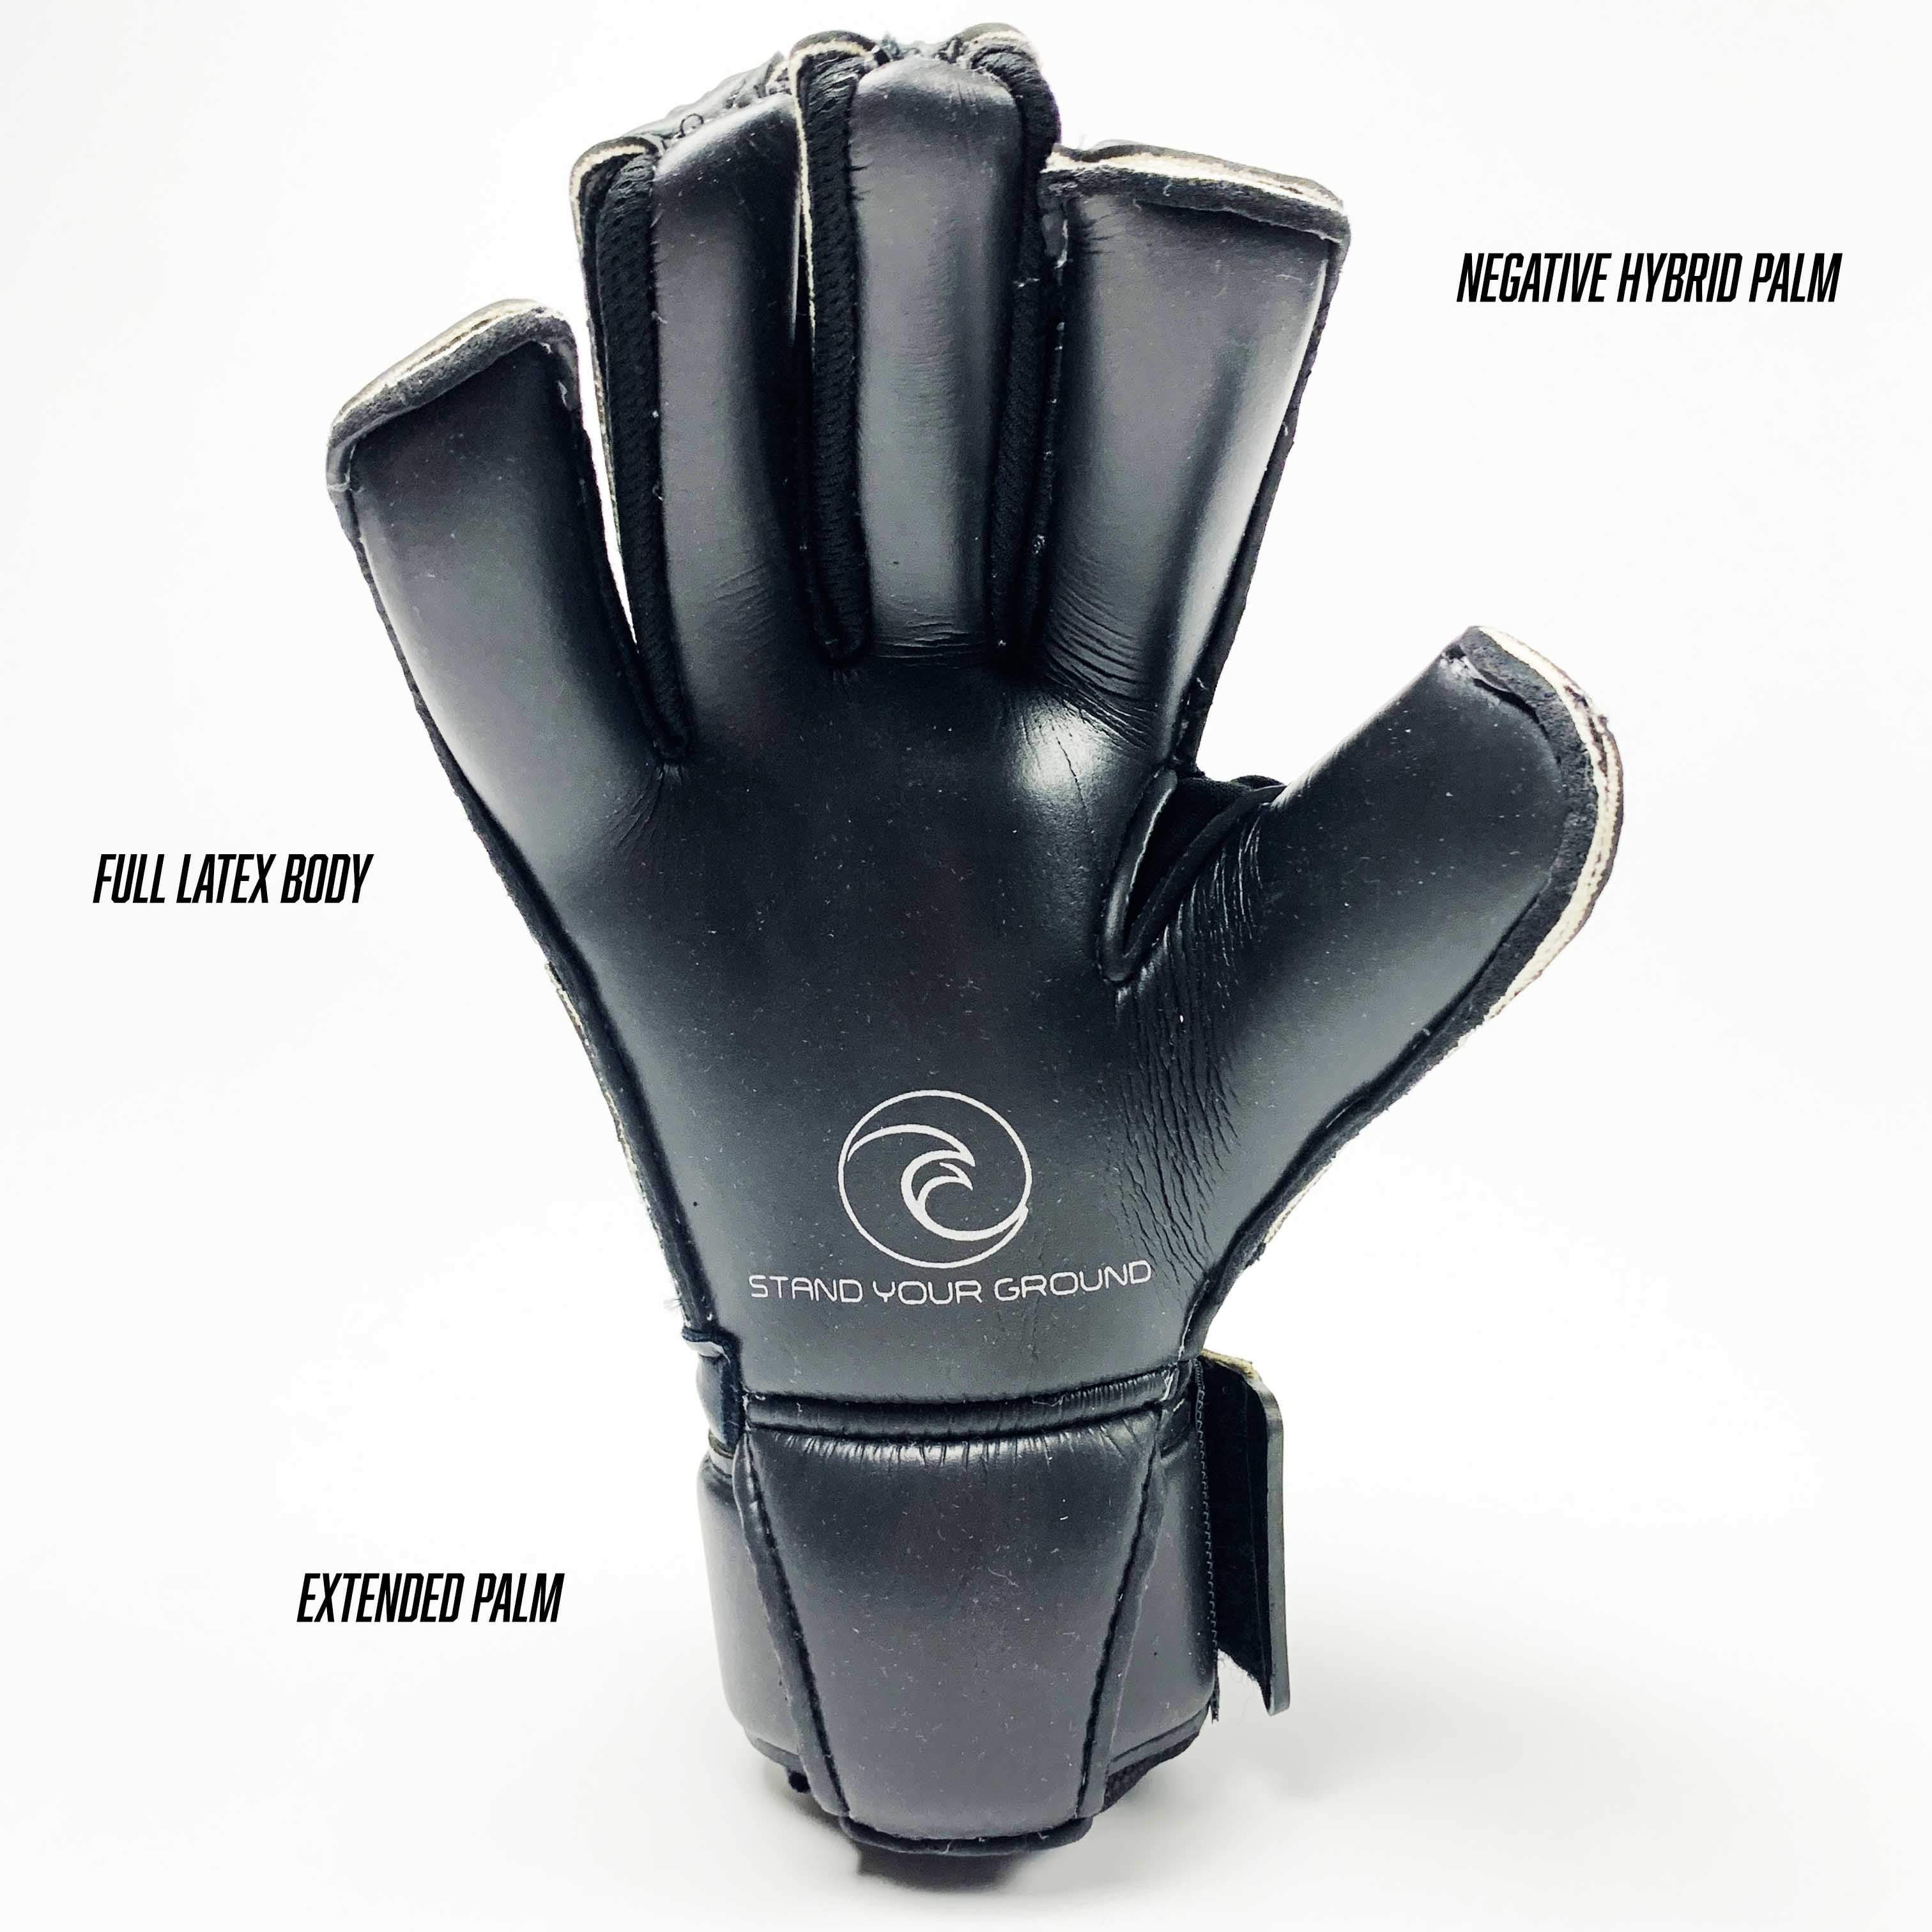 Best goalkeeper gloves 2022: Latex and mesh designs for great grip